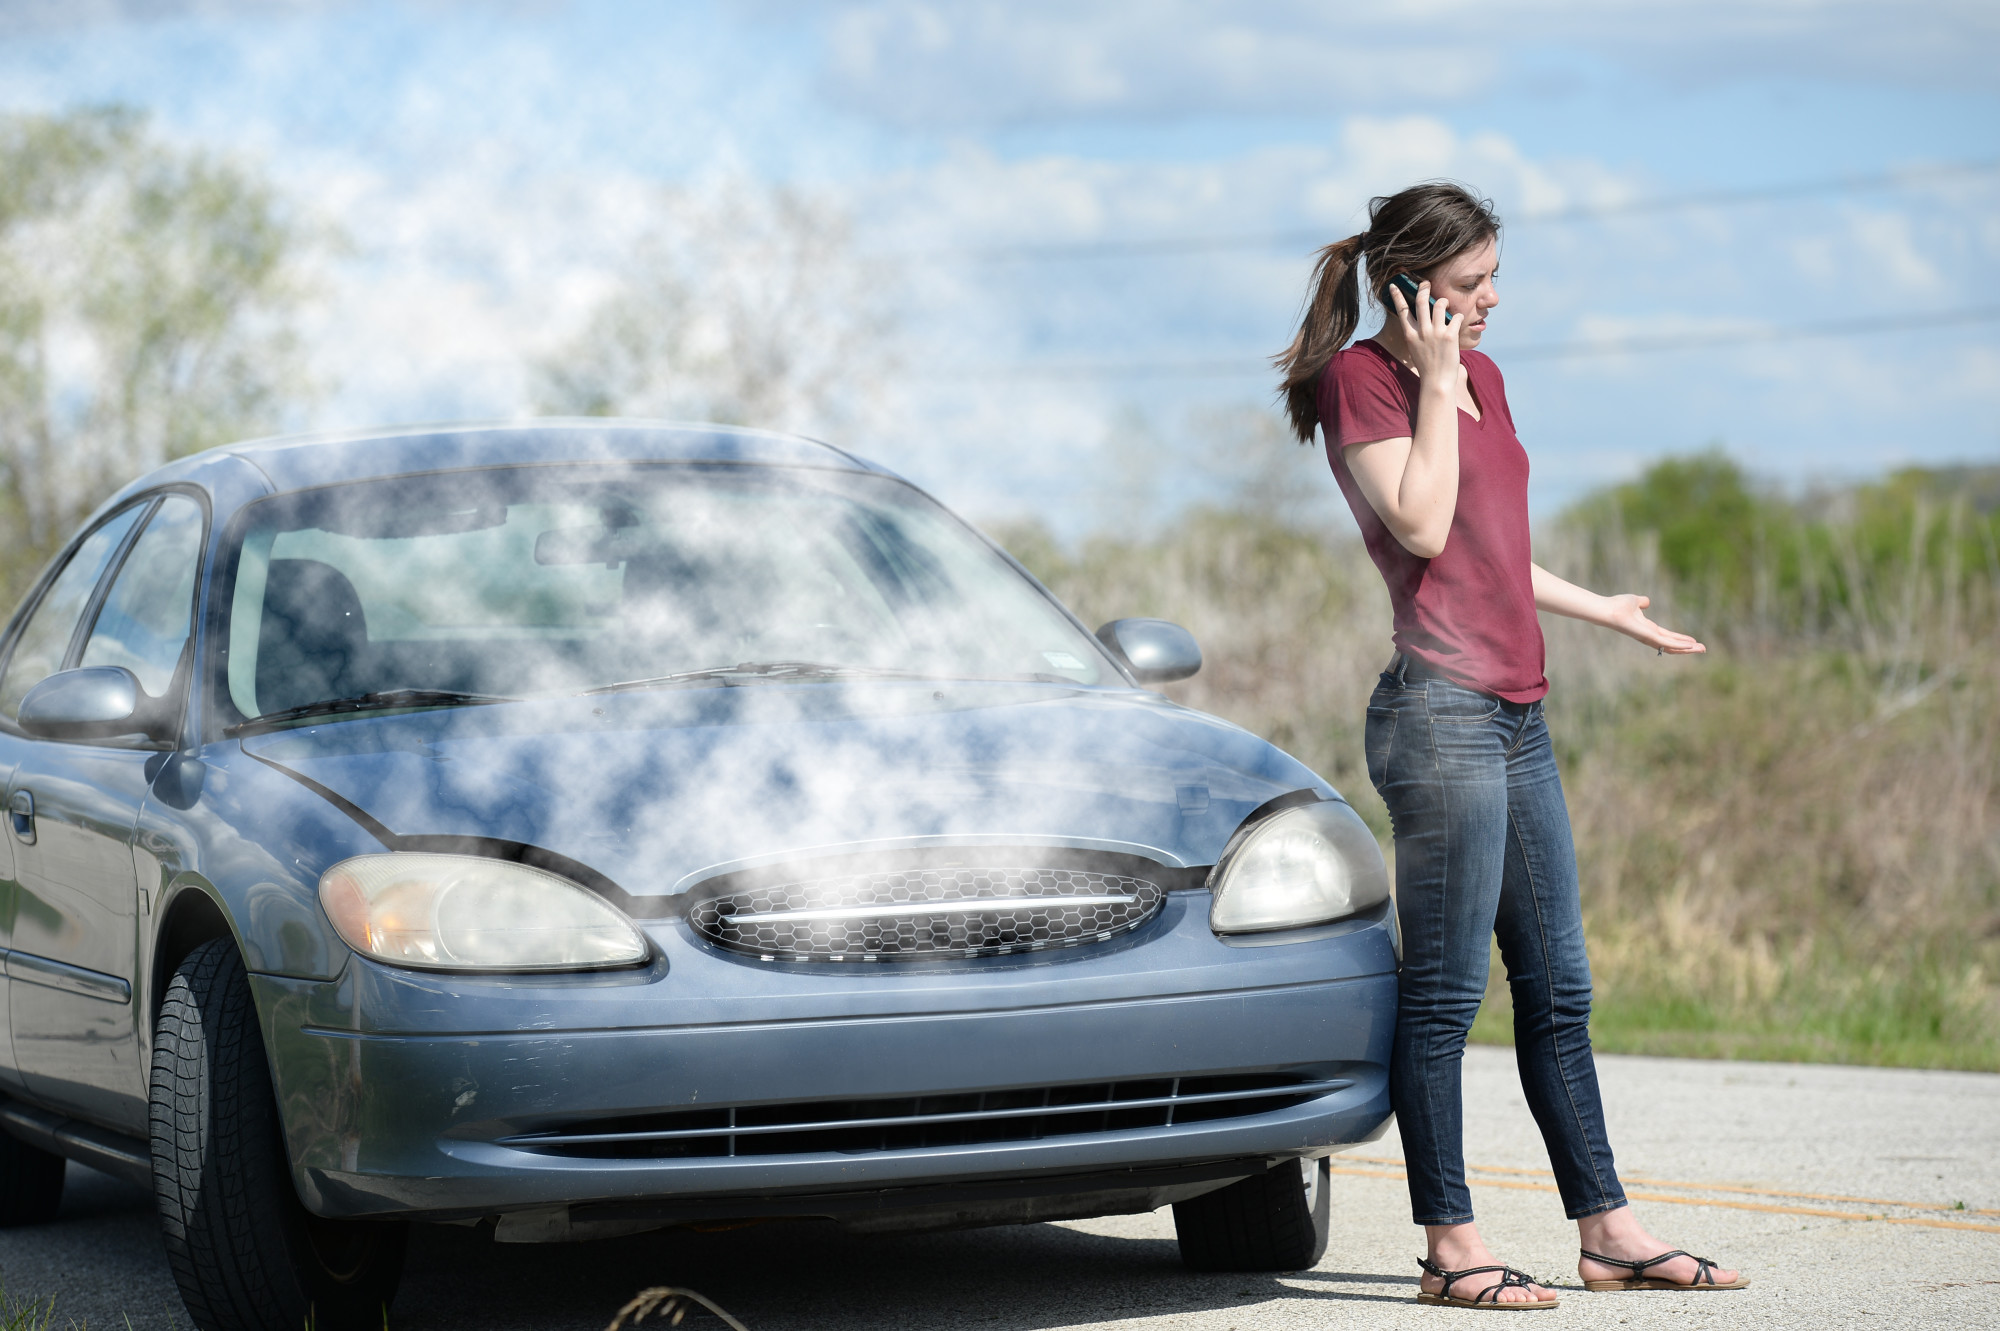 Woman With an Overheating Car